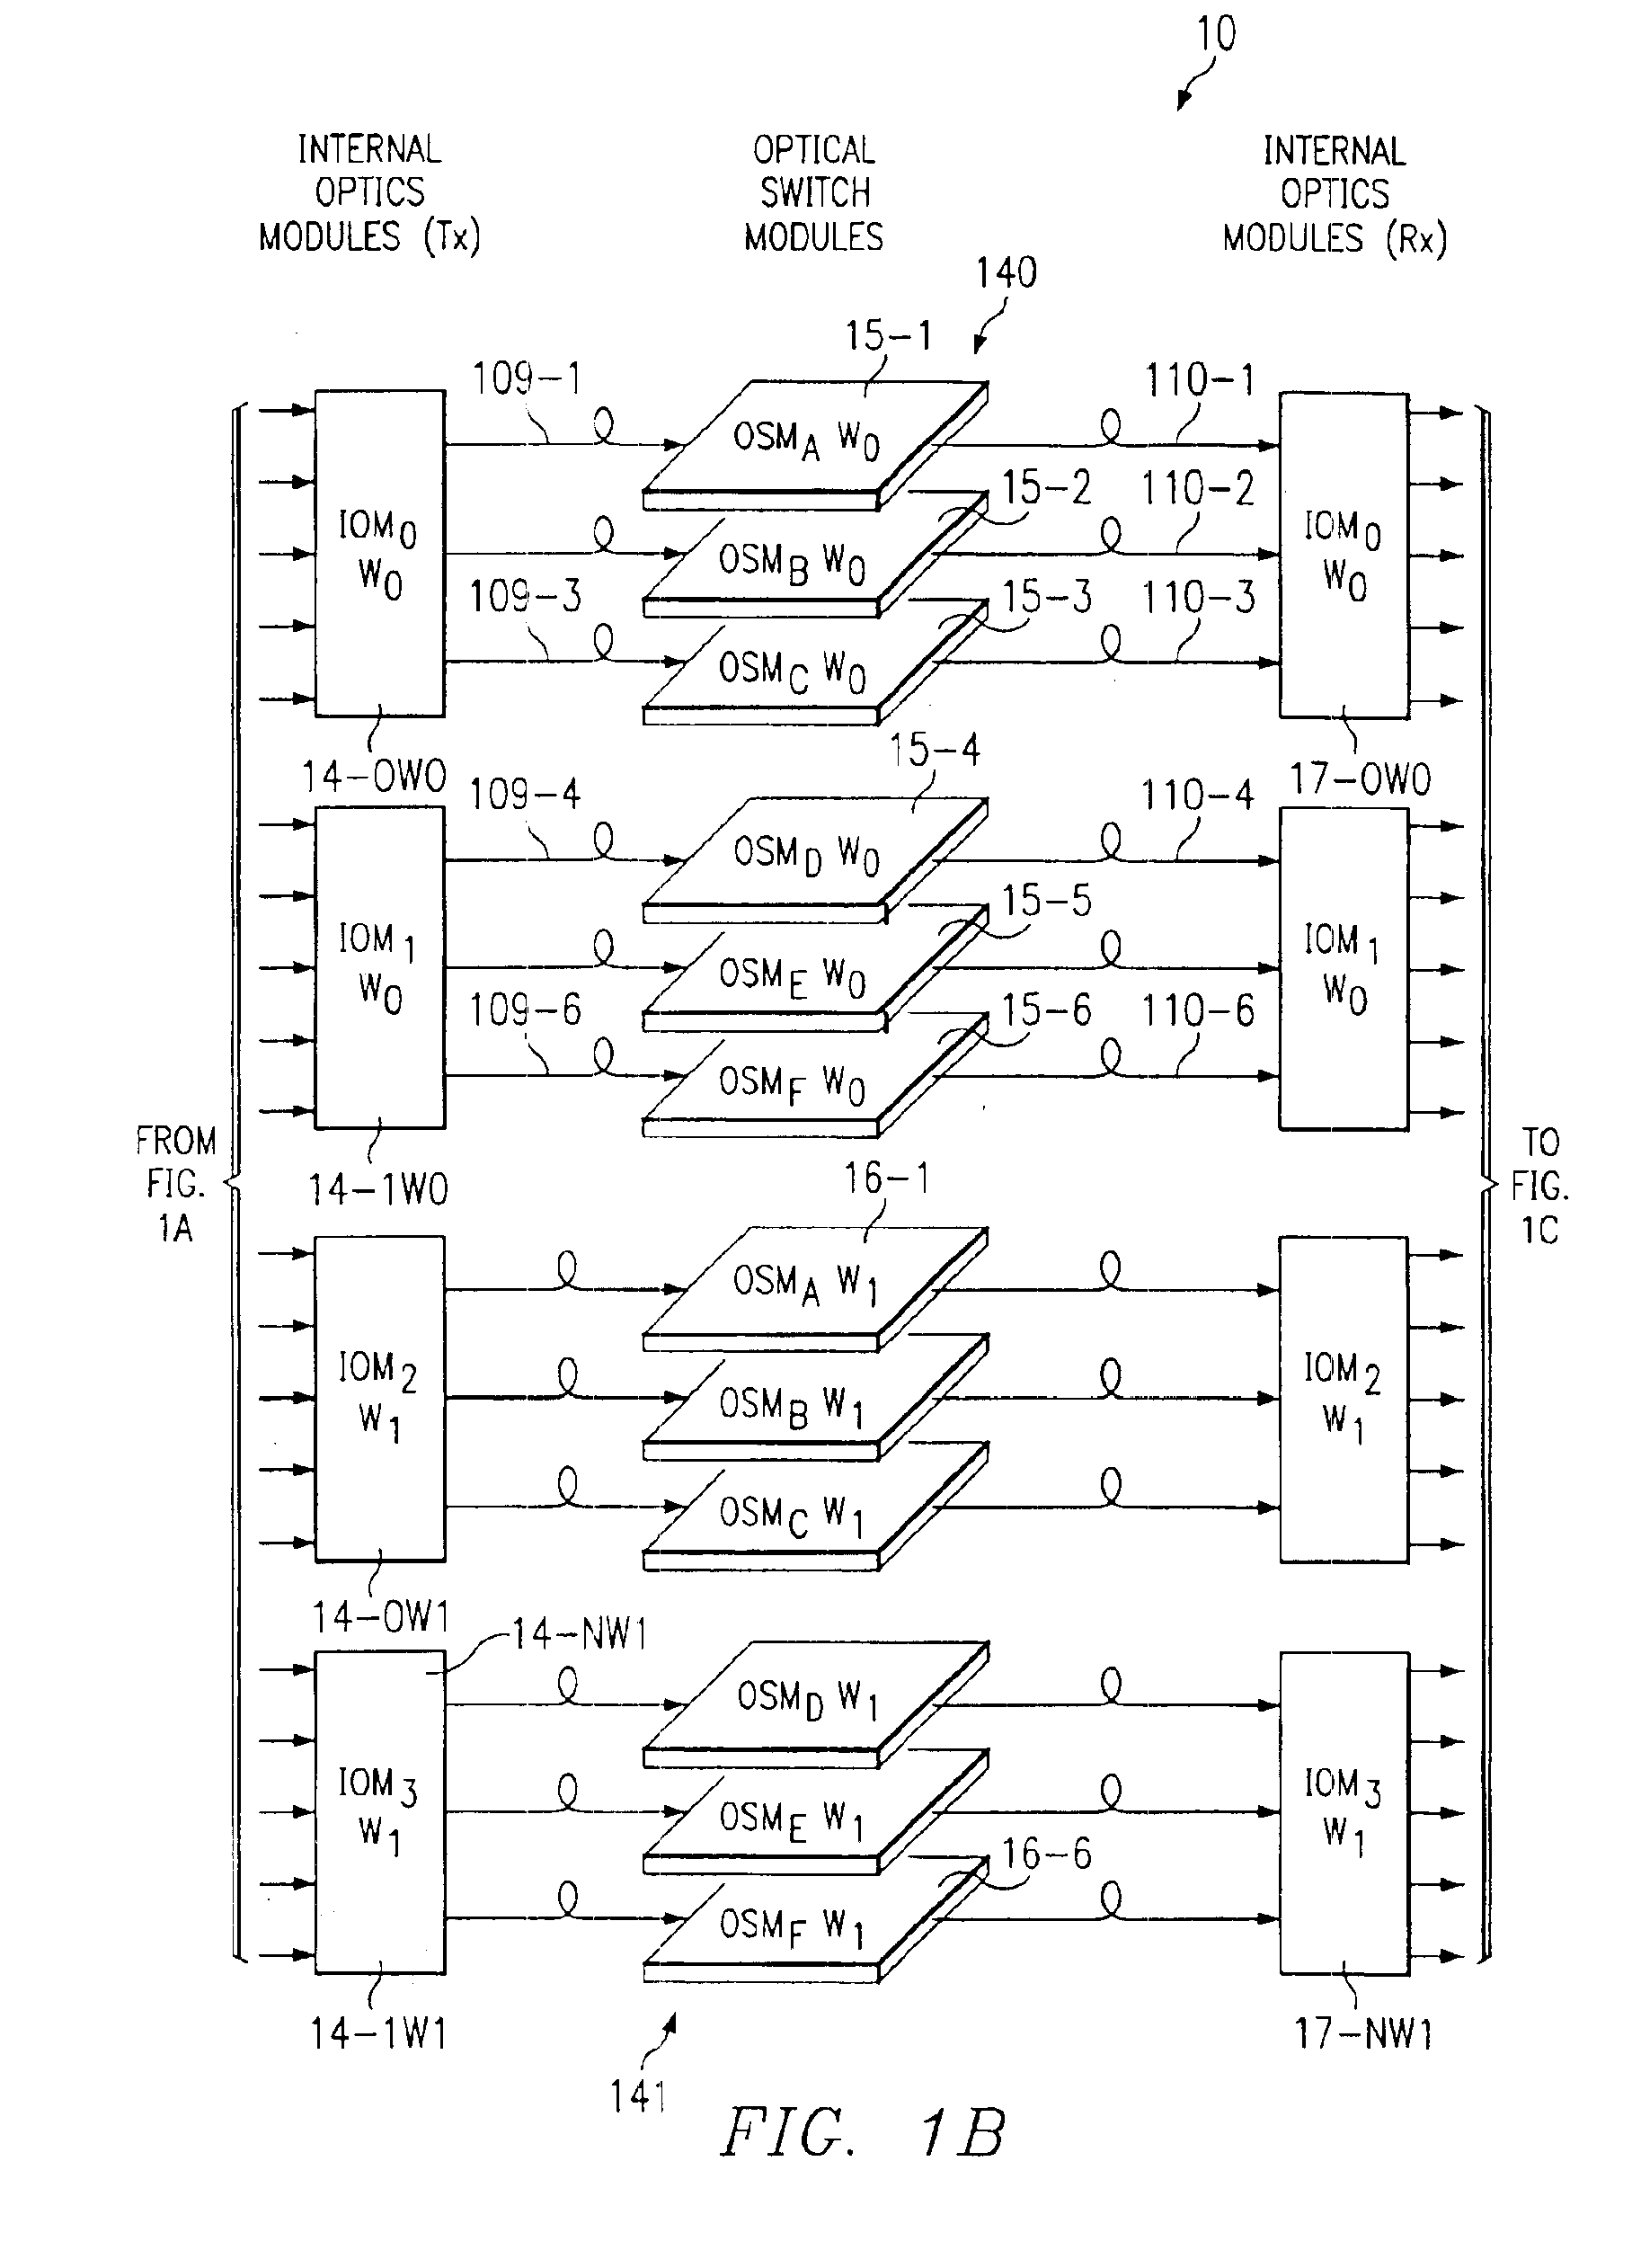 Router switch fabric protection using forward error correction